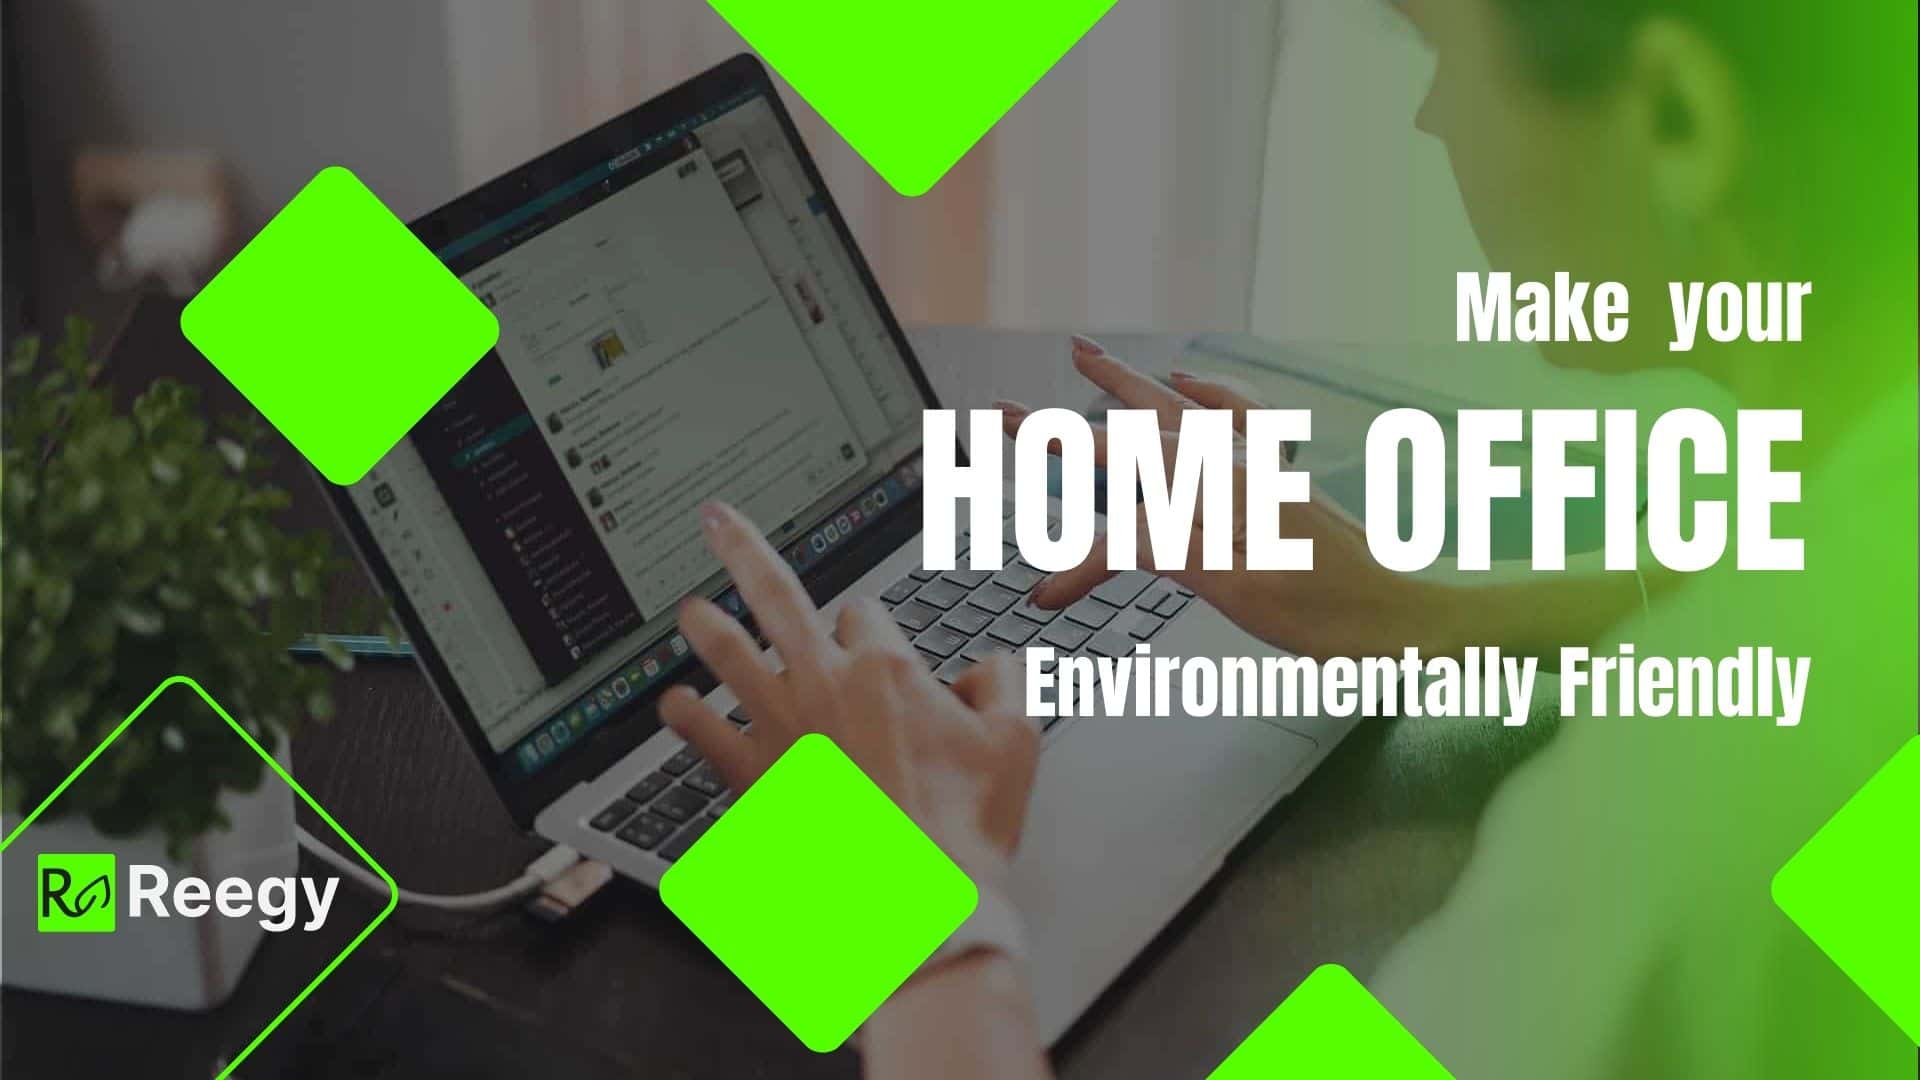 Make your home office environmentally friendly